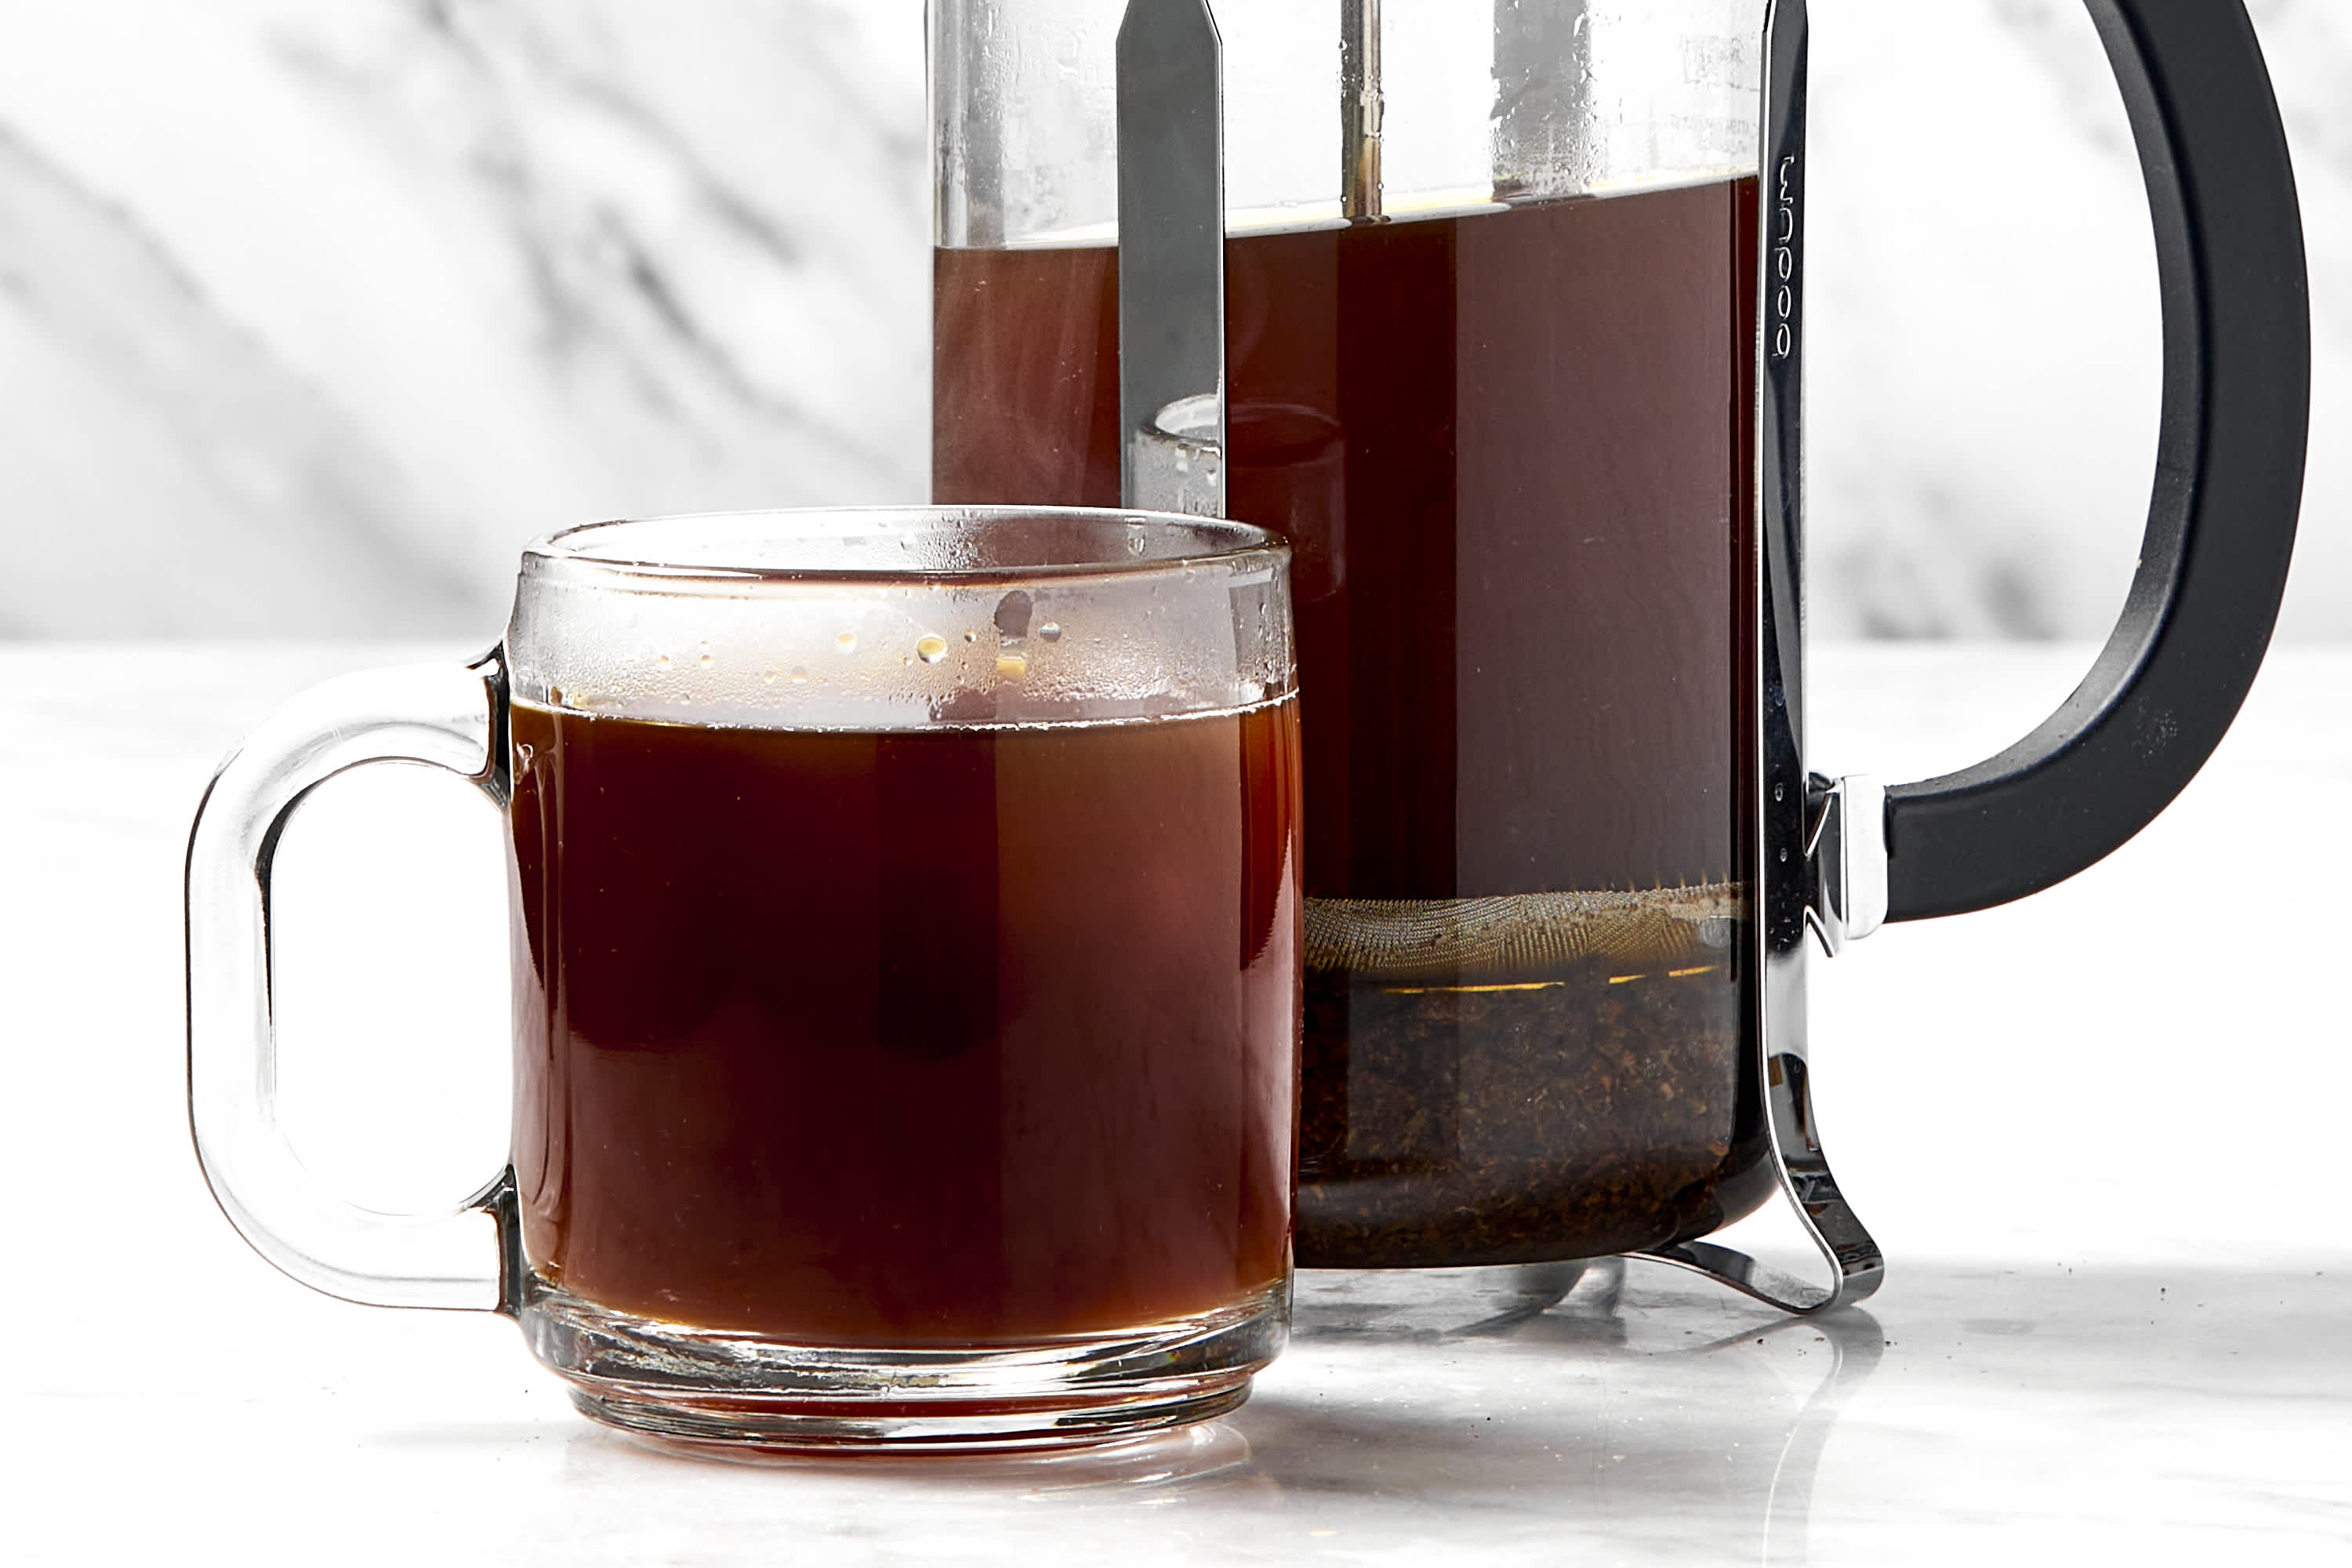 French Press Coffee at Home, Online class & kit